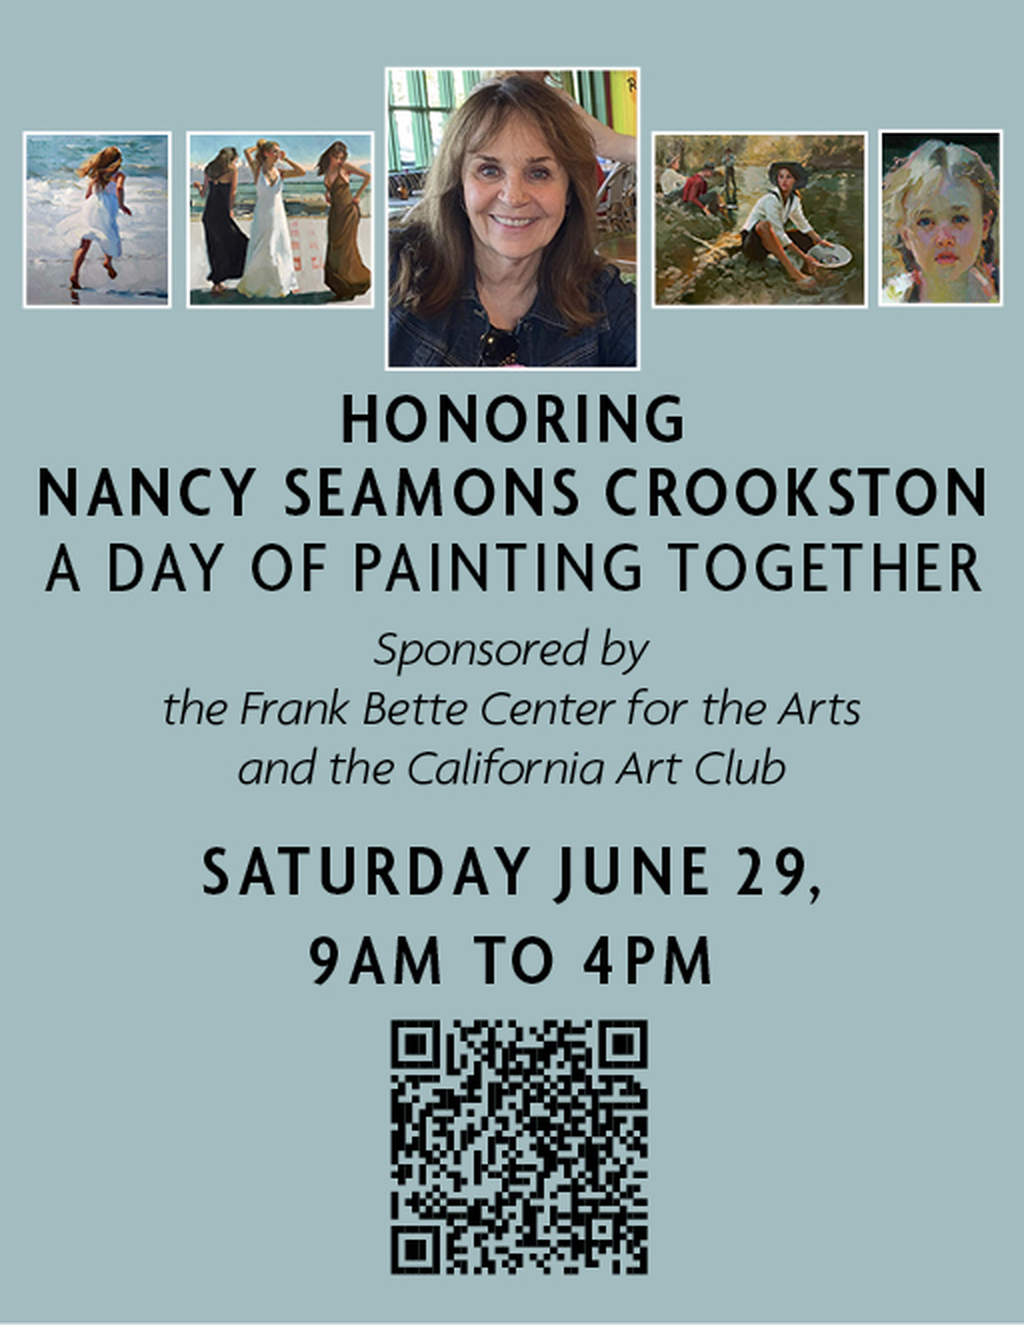 Frank Bette Center For the Arts  strong HONORING NANCY SEAMONS CROOKSTON  strong  promotion flier on Digifli com